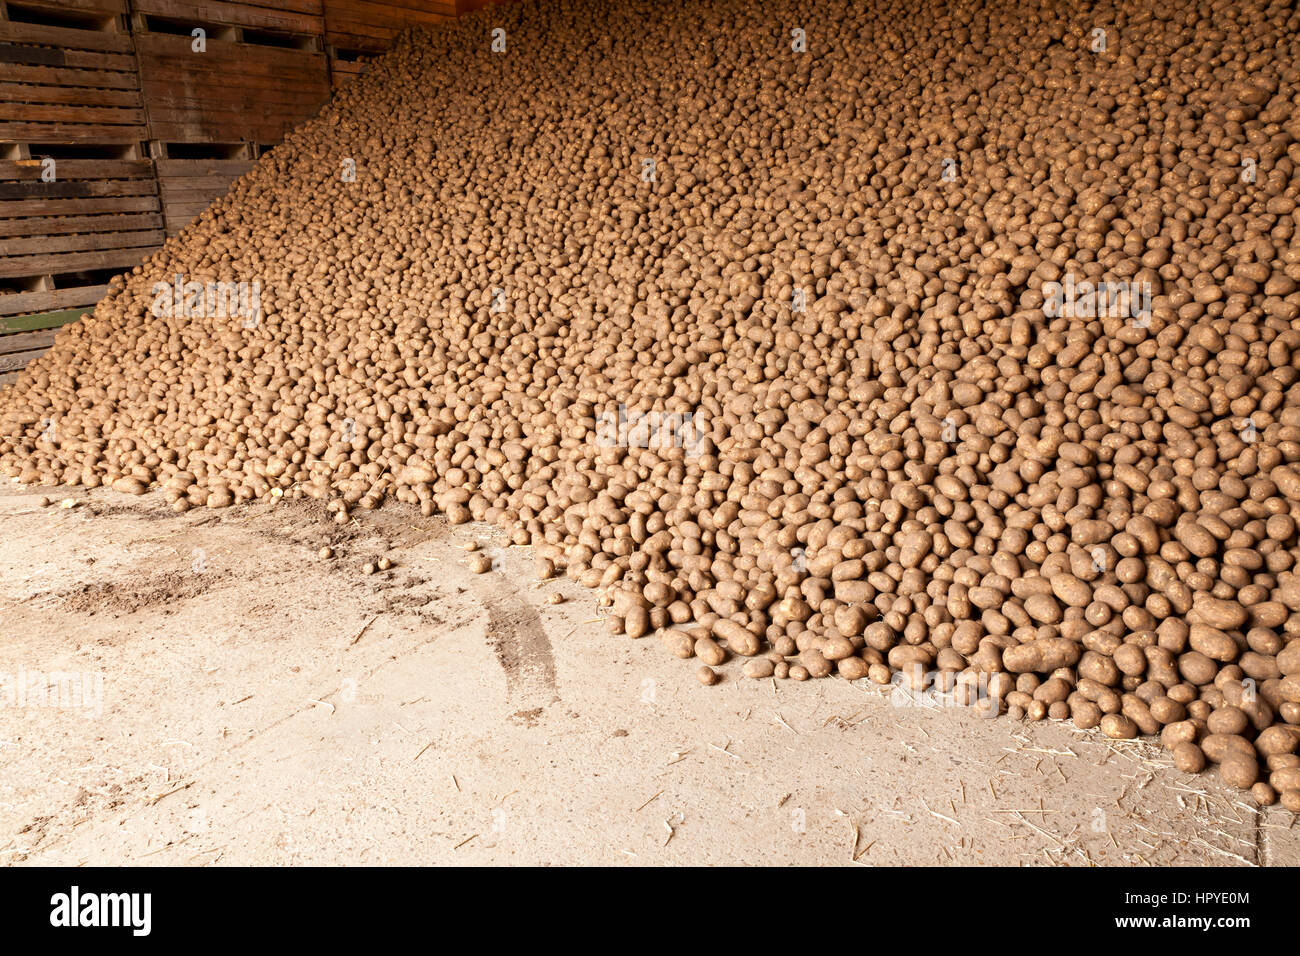 Potatoes in agrigcultural storage Stock Photo